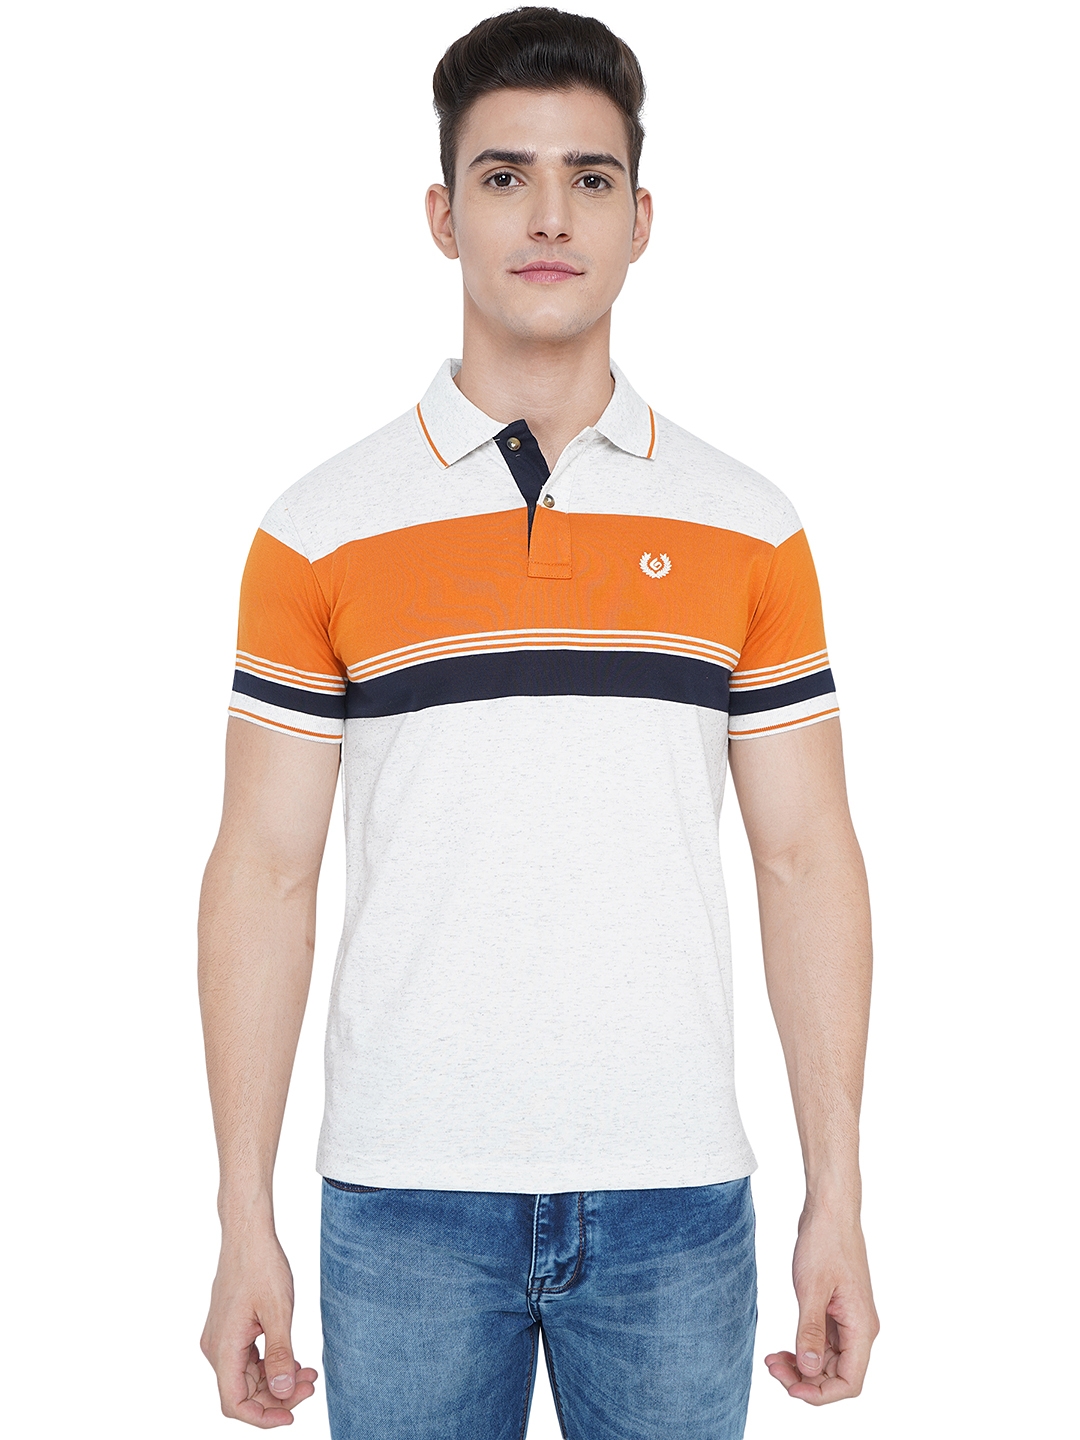 Greenfibre | White Striped Slim Fit Polo T-Shirt | Greenfibre 0